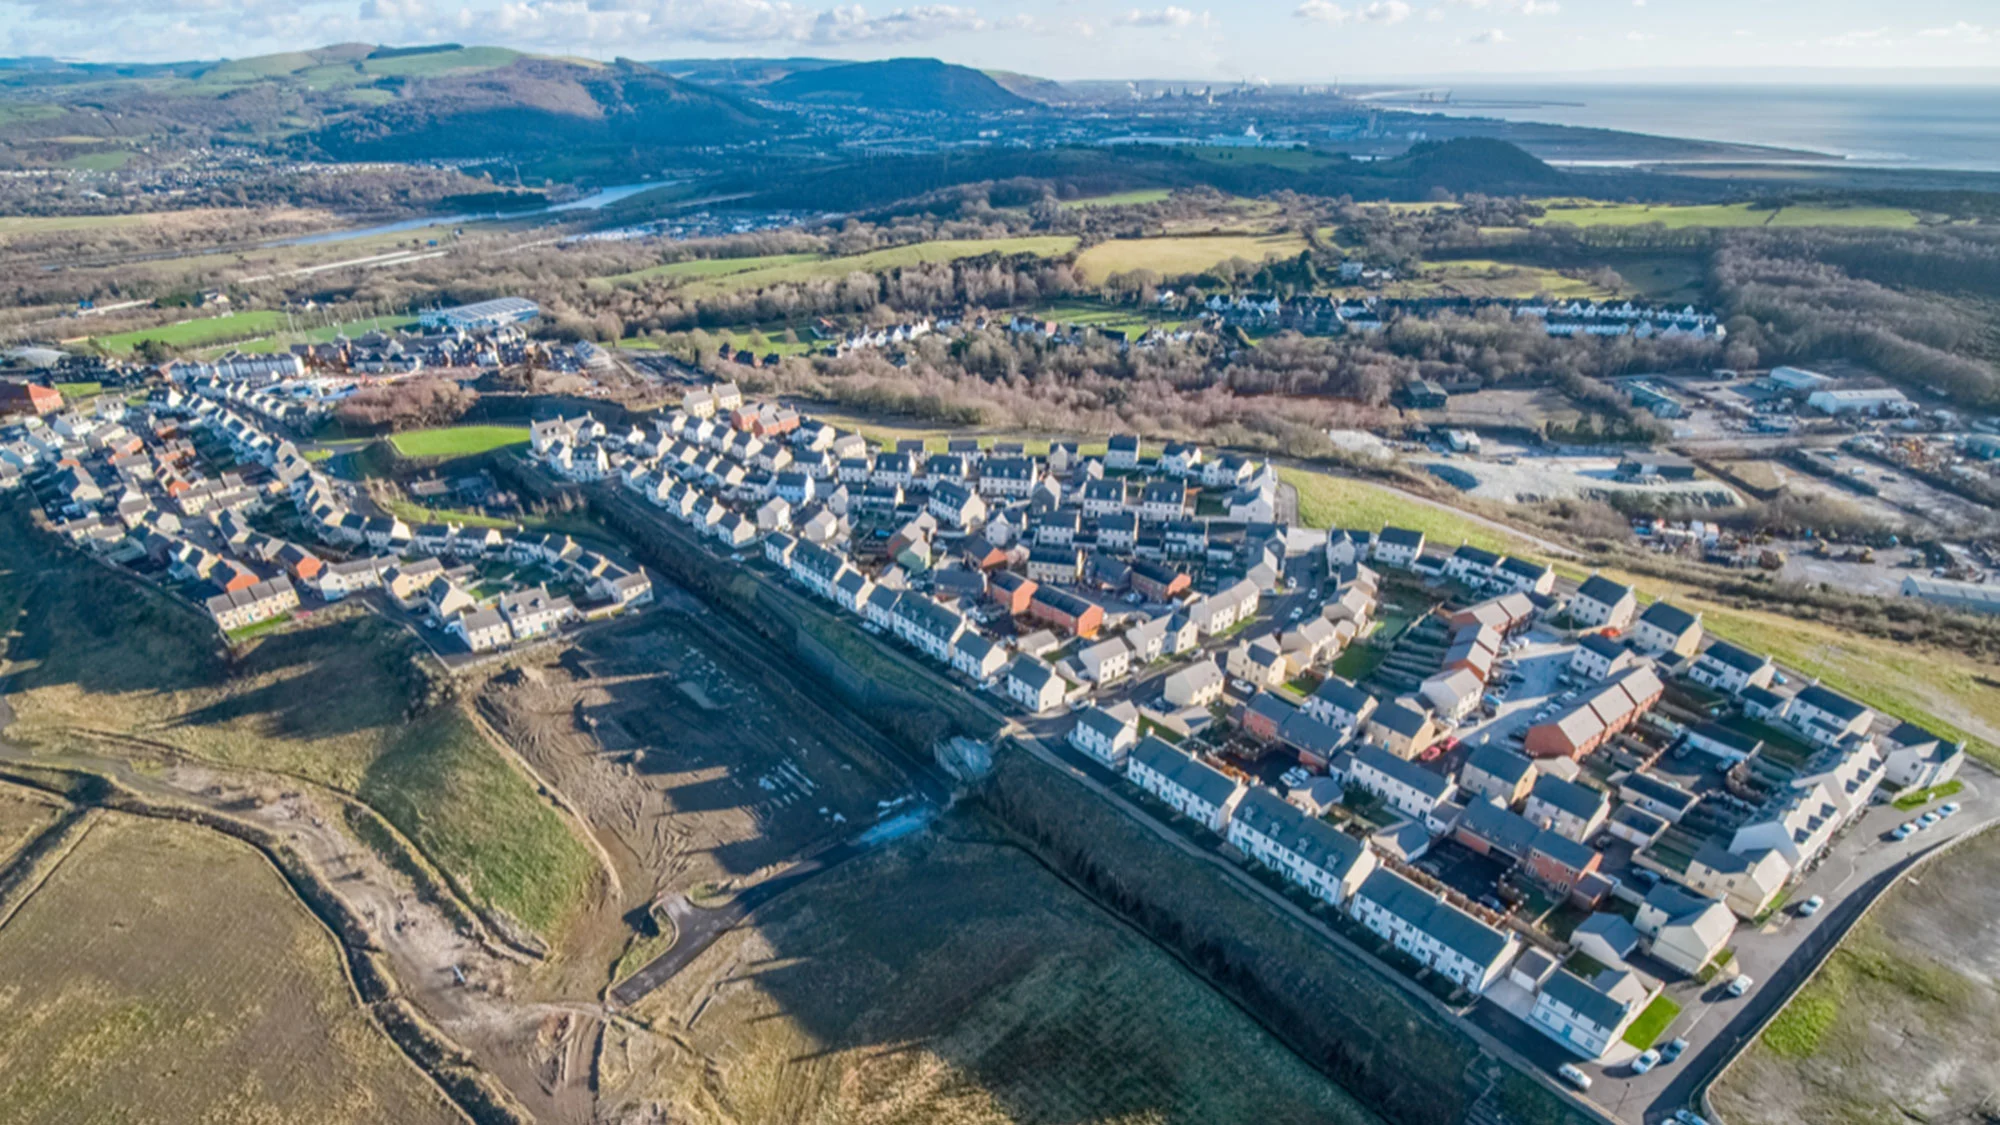 An aerial view of the Coed Darcy village development in 2021